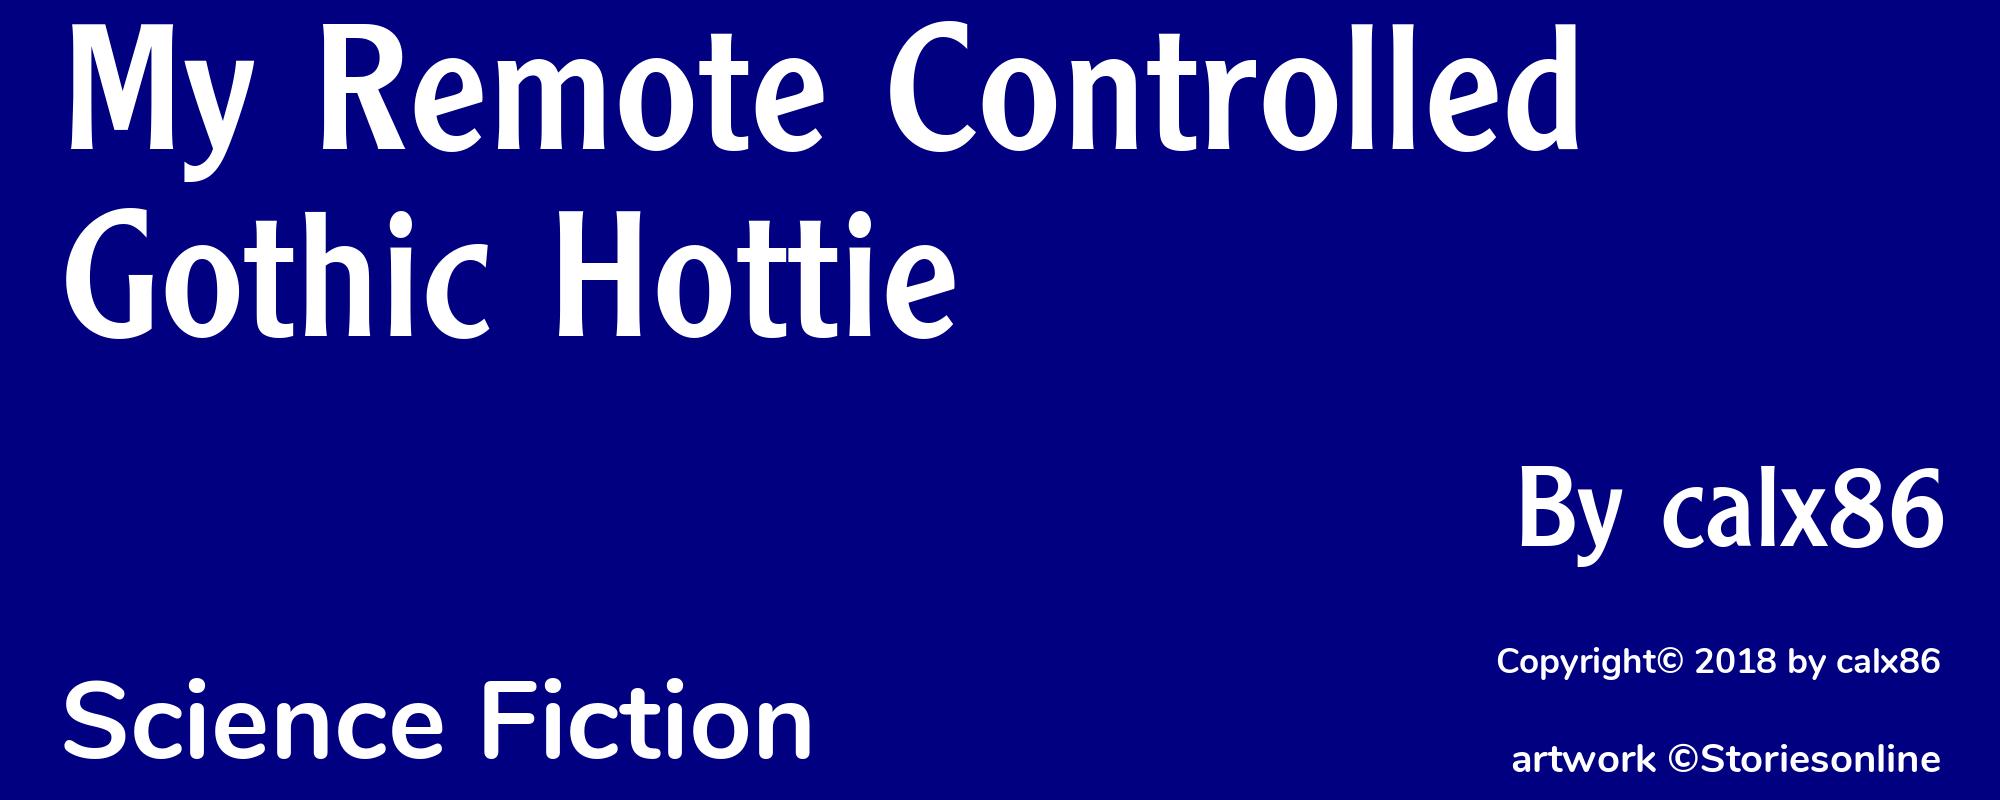 My Remote Controlled Gothic Hottie - Cover